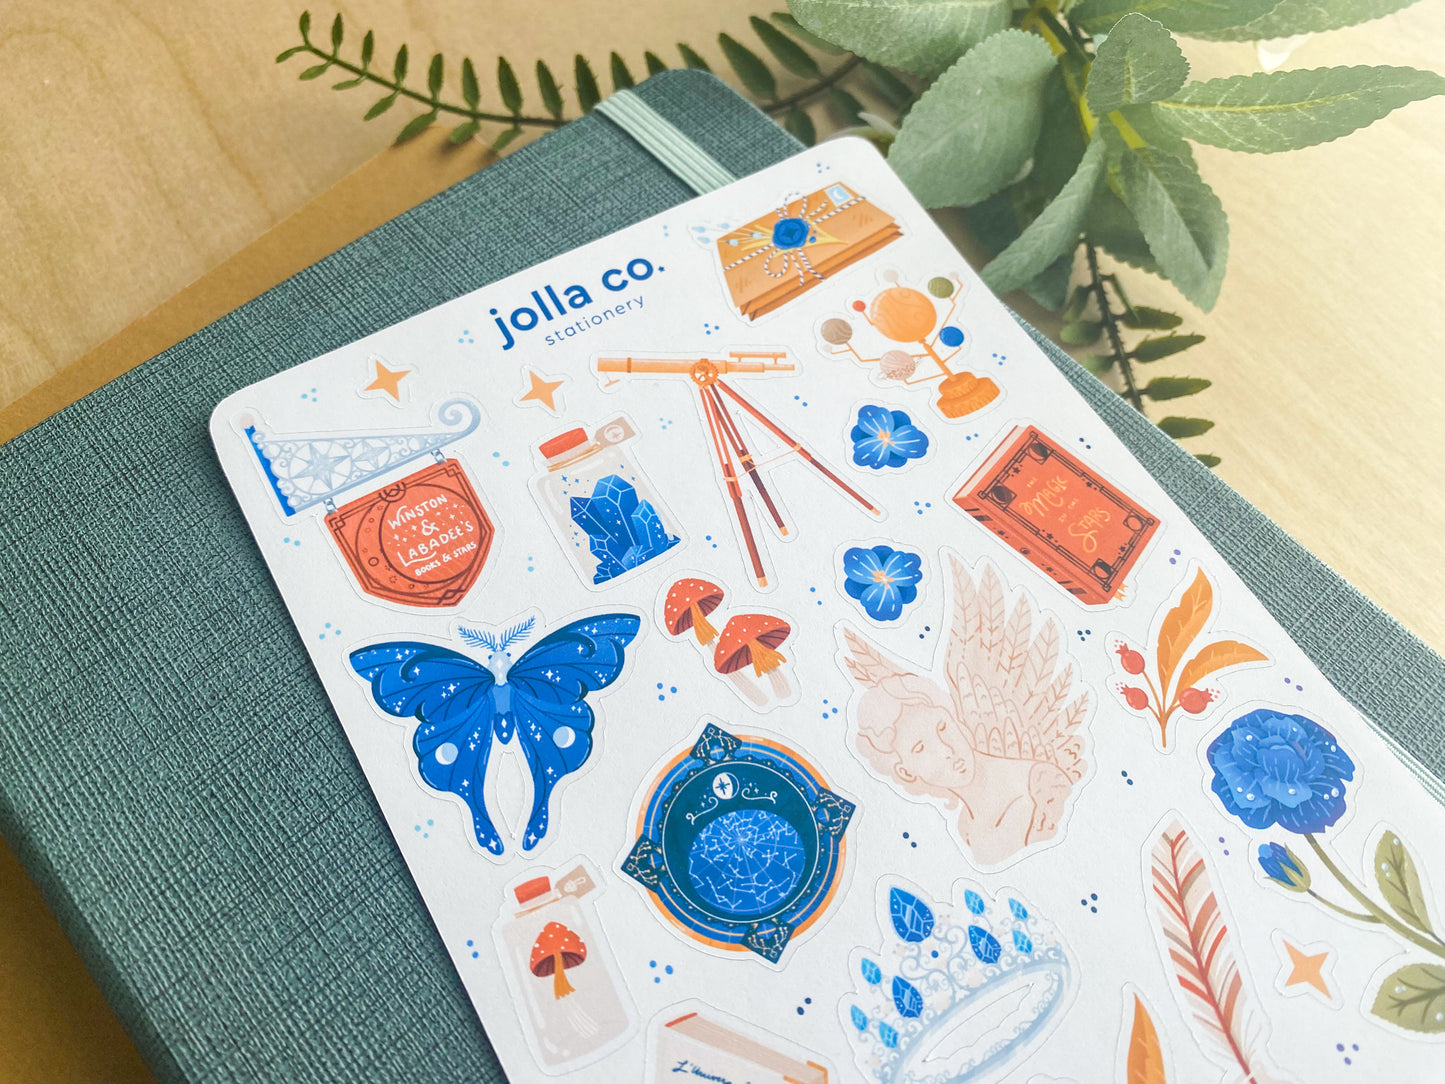 Astrology Academia Sticker Sheet | For Bullet Journals, Planners, & Crafts